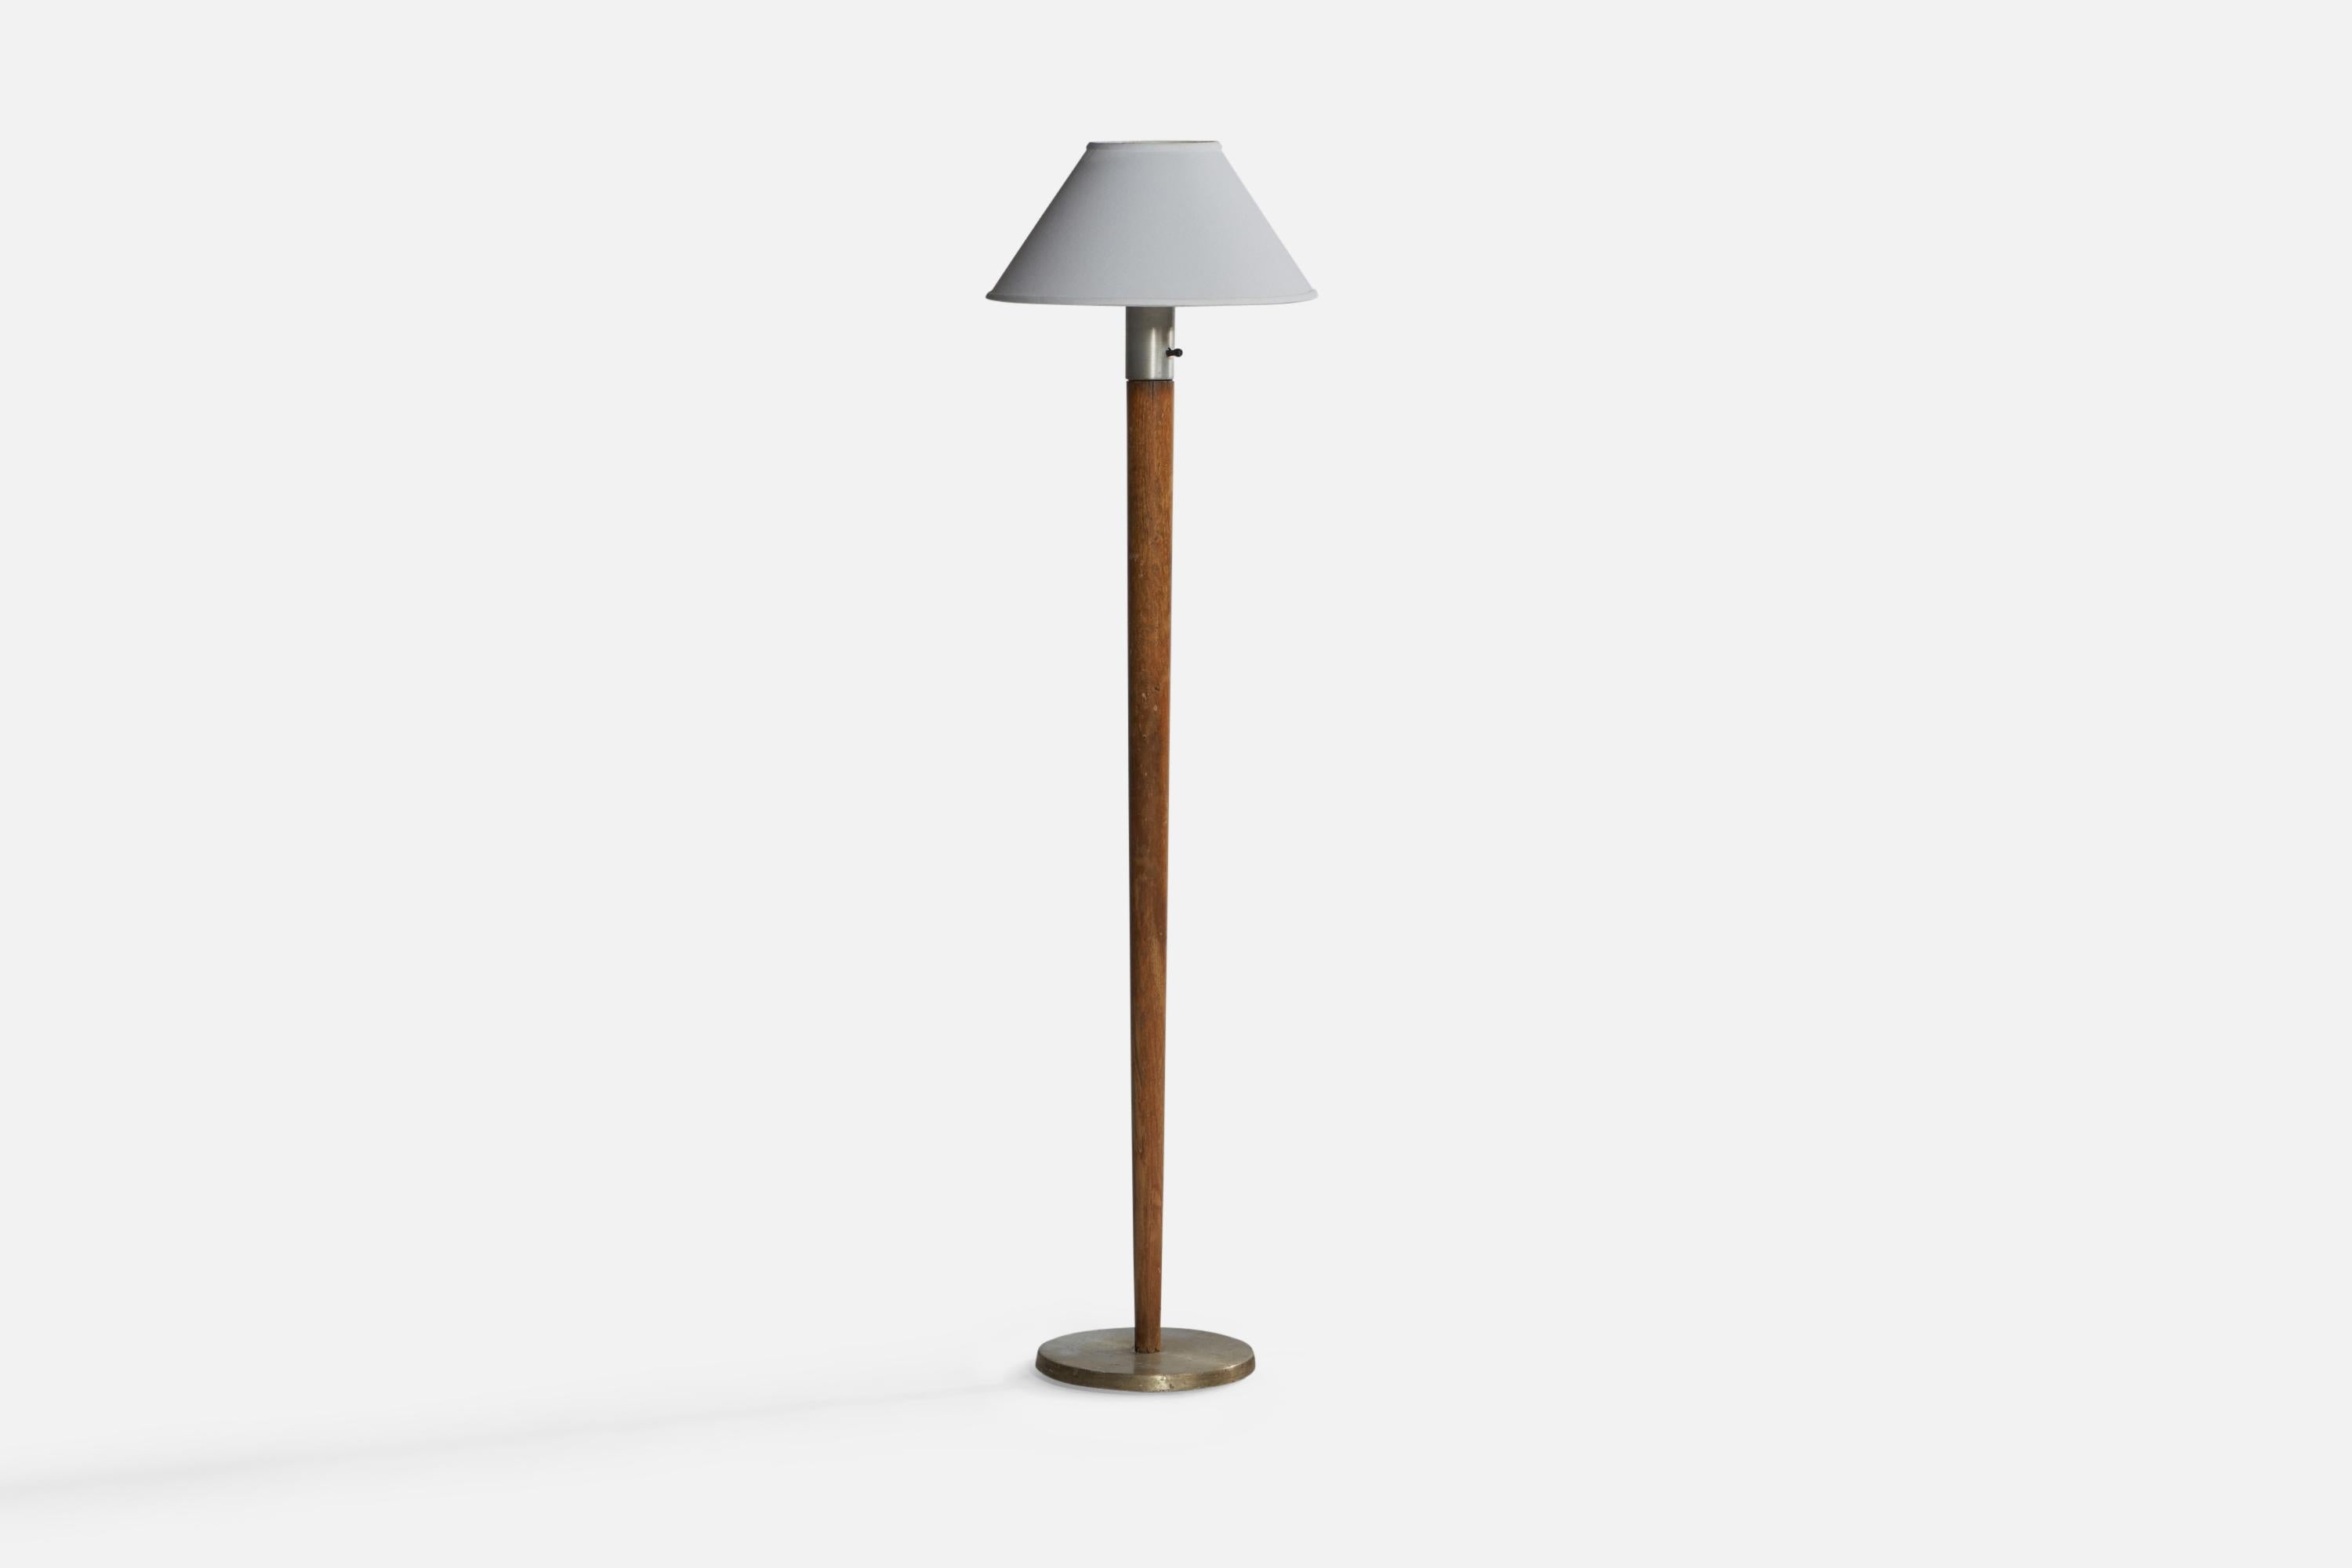 A stained oak and steel and white fabric floor lamp designed and produced by Kurt Versen, USA, 1940s.

Overall Dimensions (inches): 61.5” H x 16.25” Diameter. Stated dimensions include shade. Lampshade rests on glass diffuser.
Bulb Specifications: